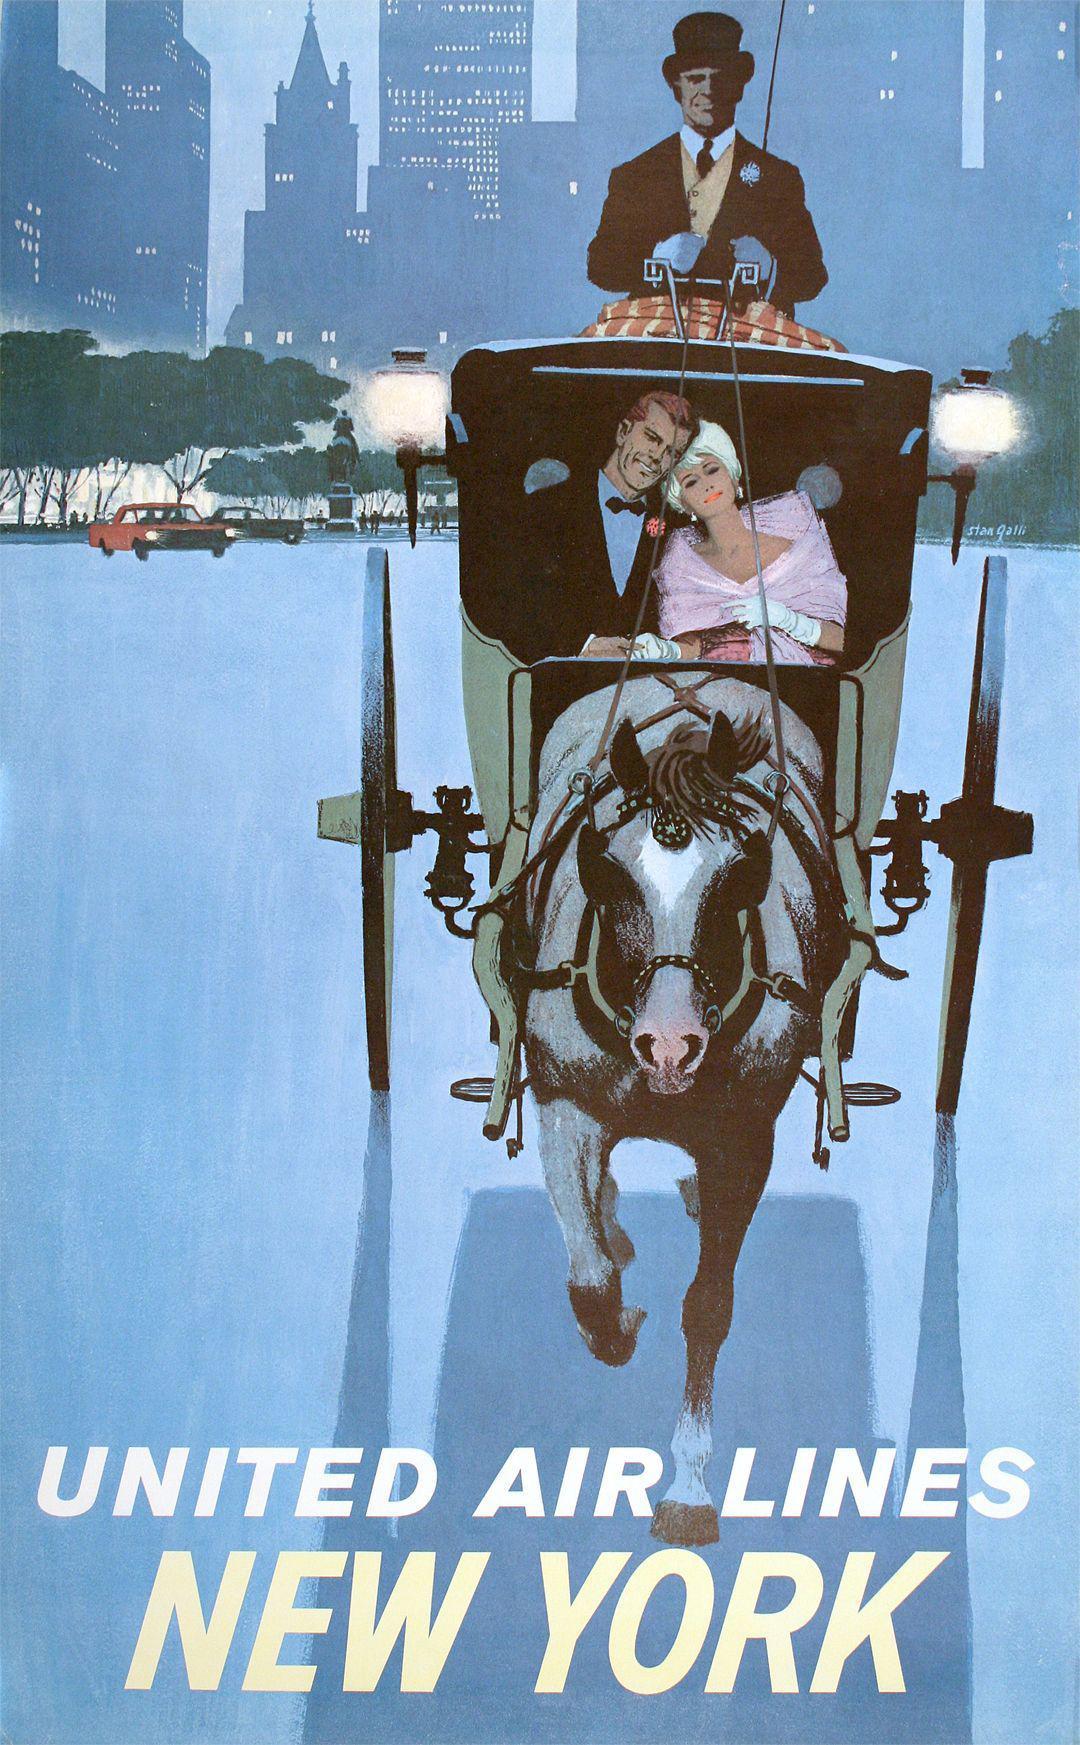 United Air Lines New York Poster by Stan Galli c1960 Central Park Carriage